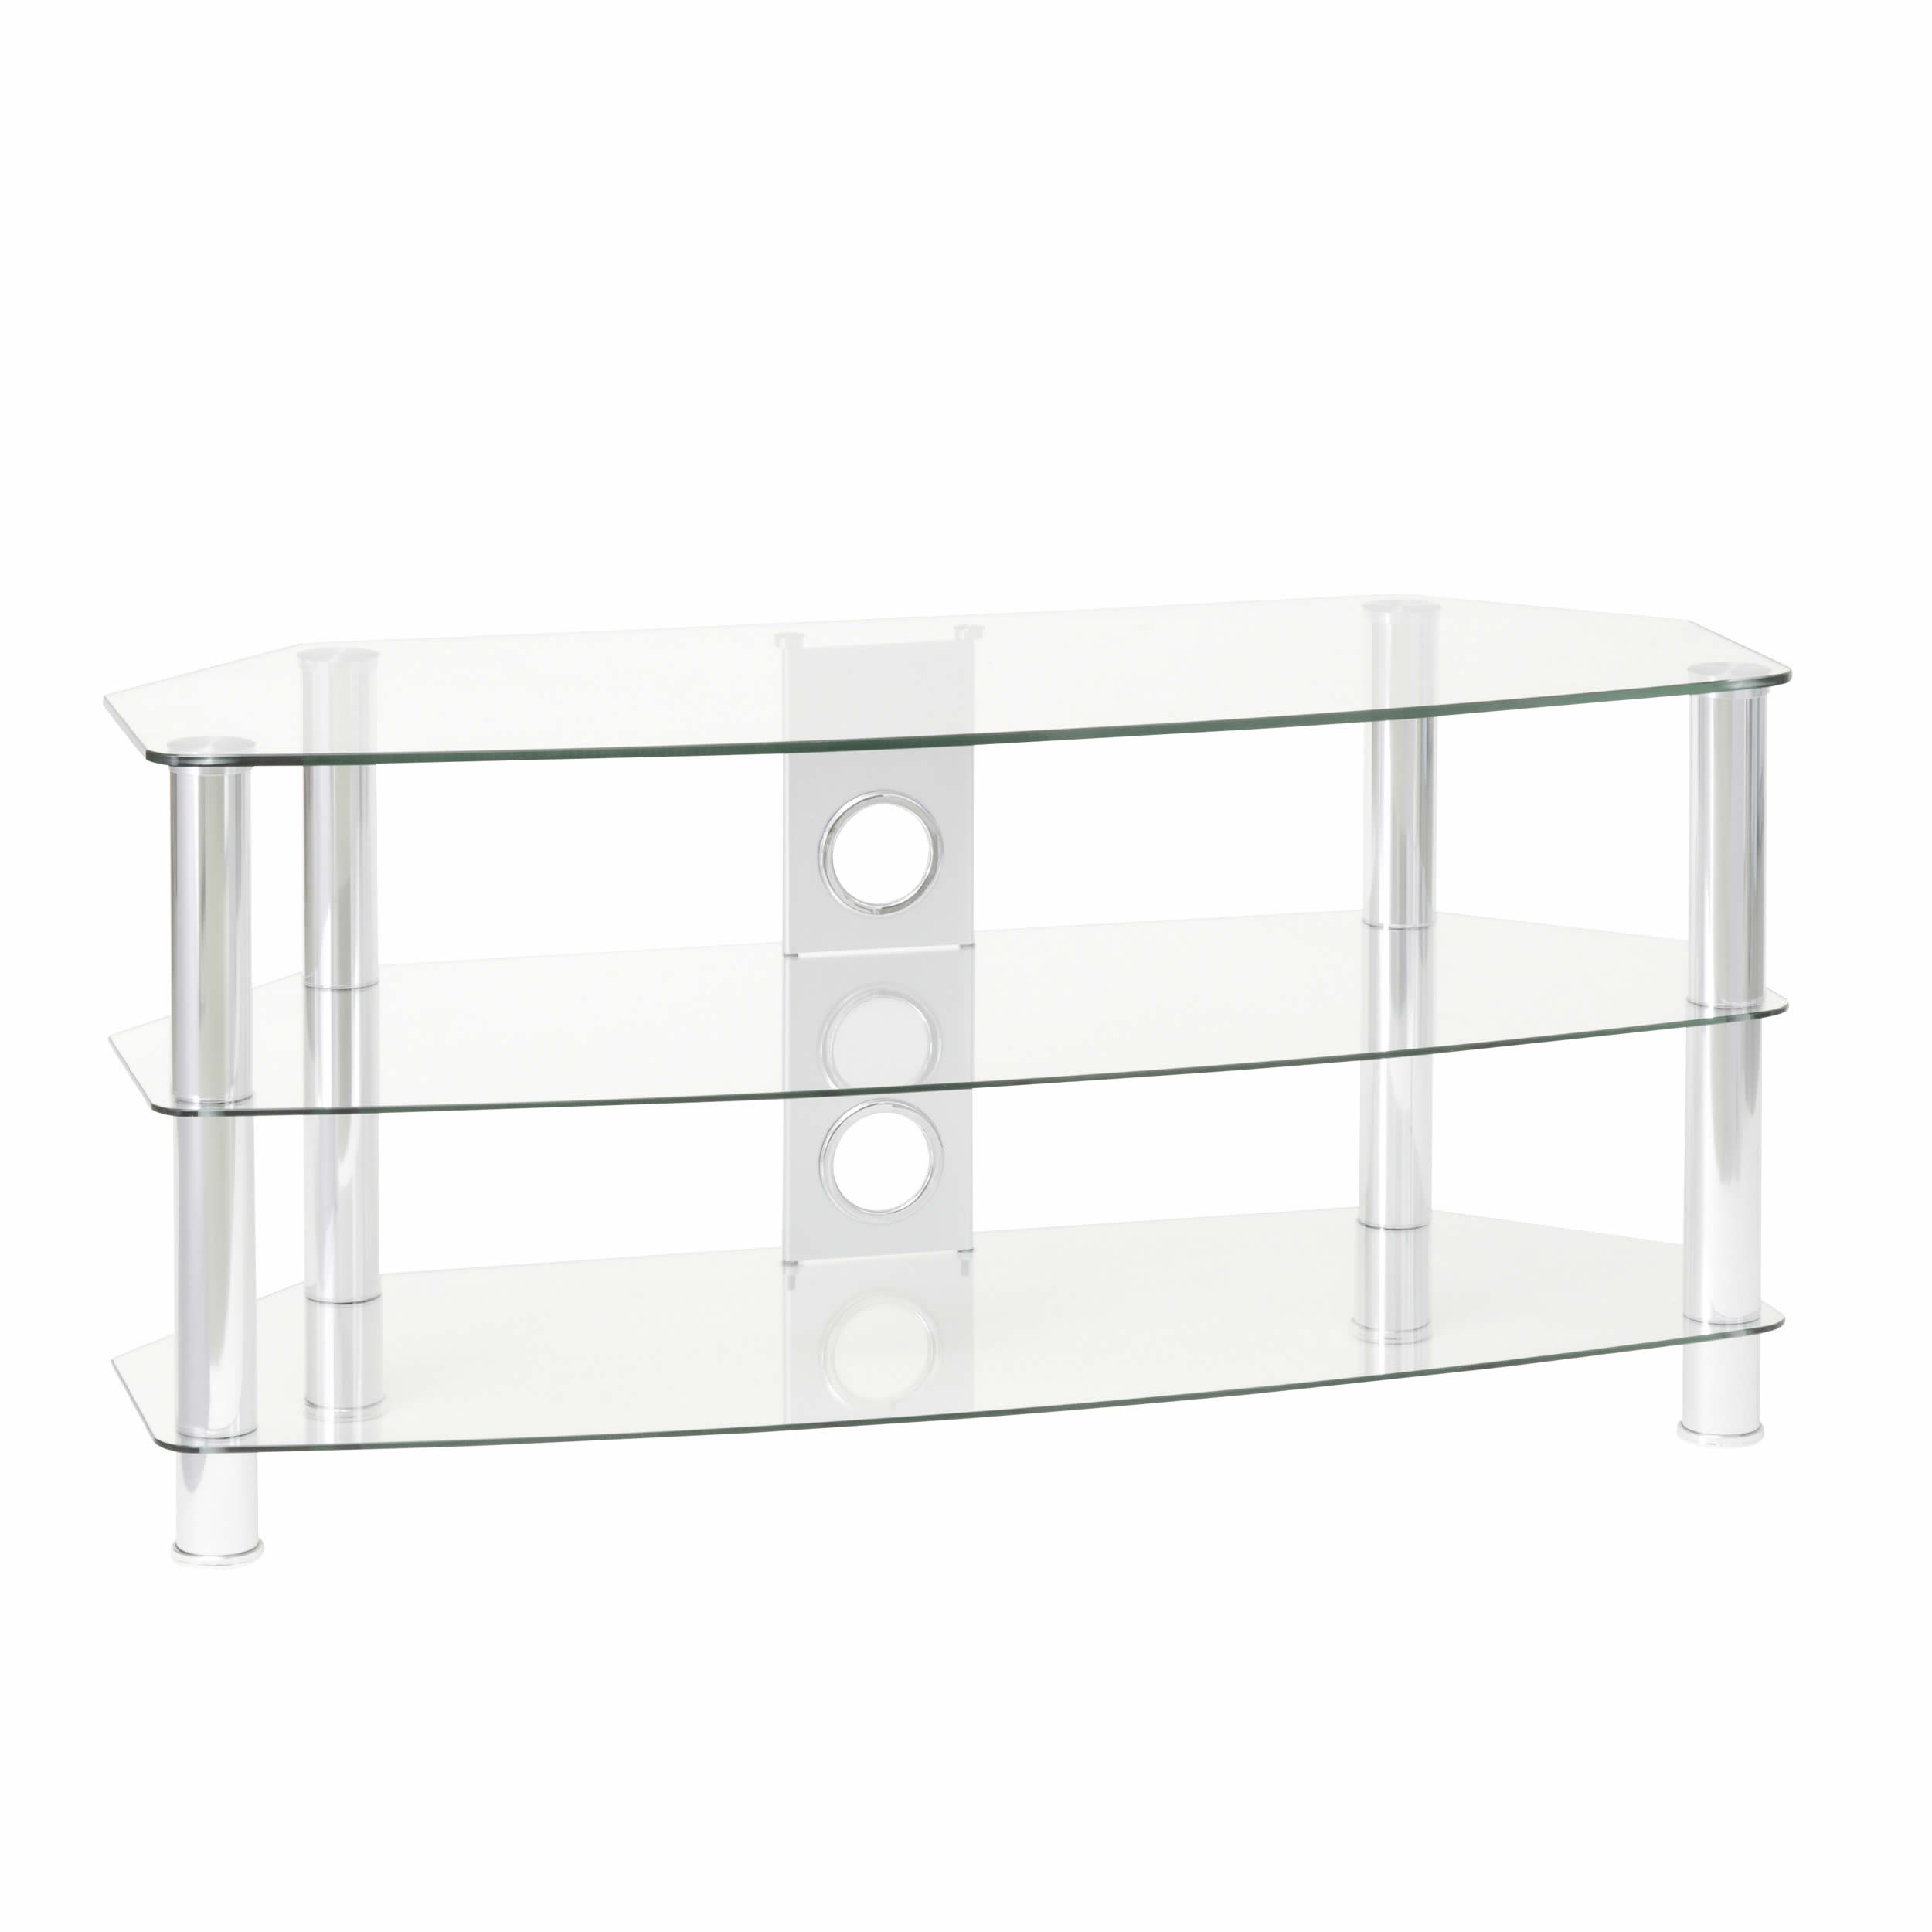 TTAP 800mm TV Stand 49inch Clear Glass Chrome Legs